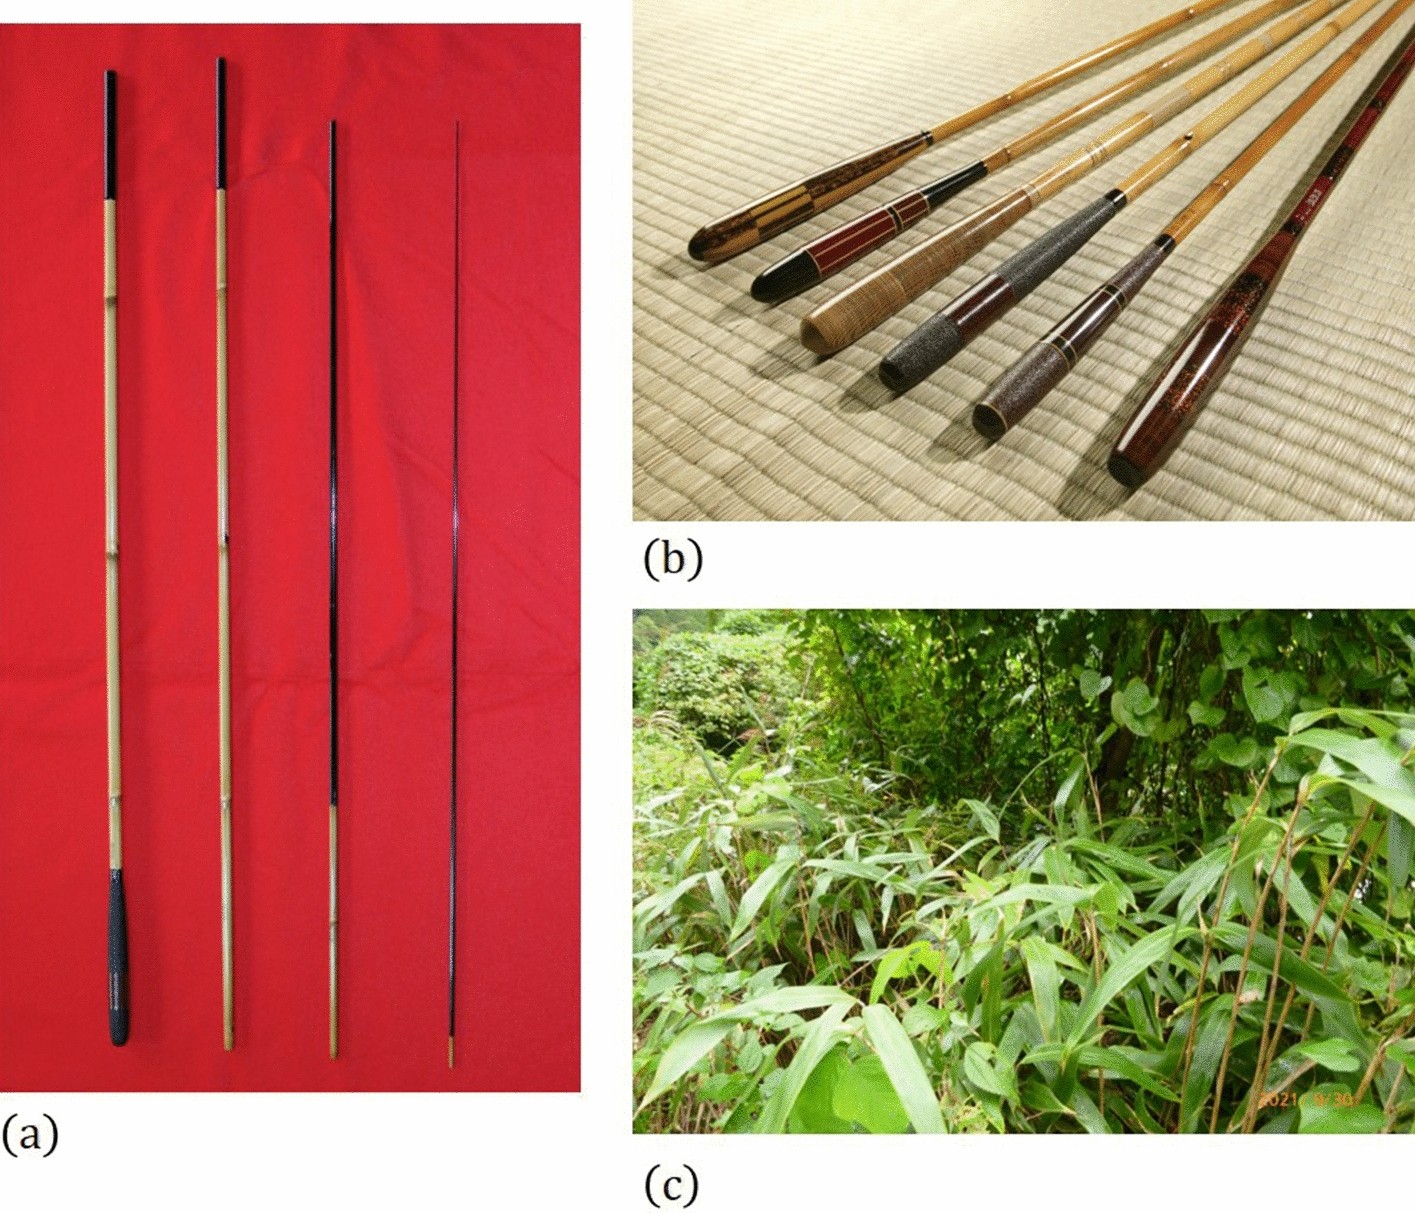 Structural rationalities of tapered hollow cylindrical beams and their use  in Japanese traditional bamboo fishing rods